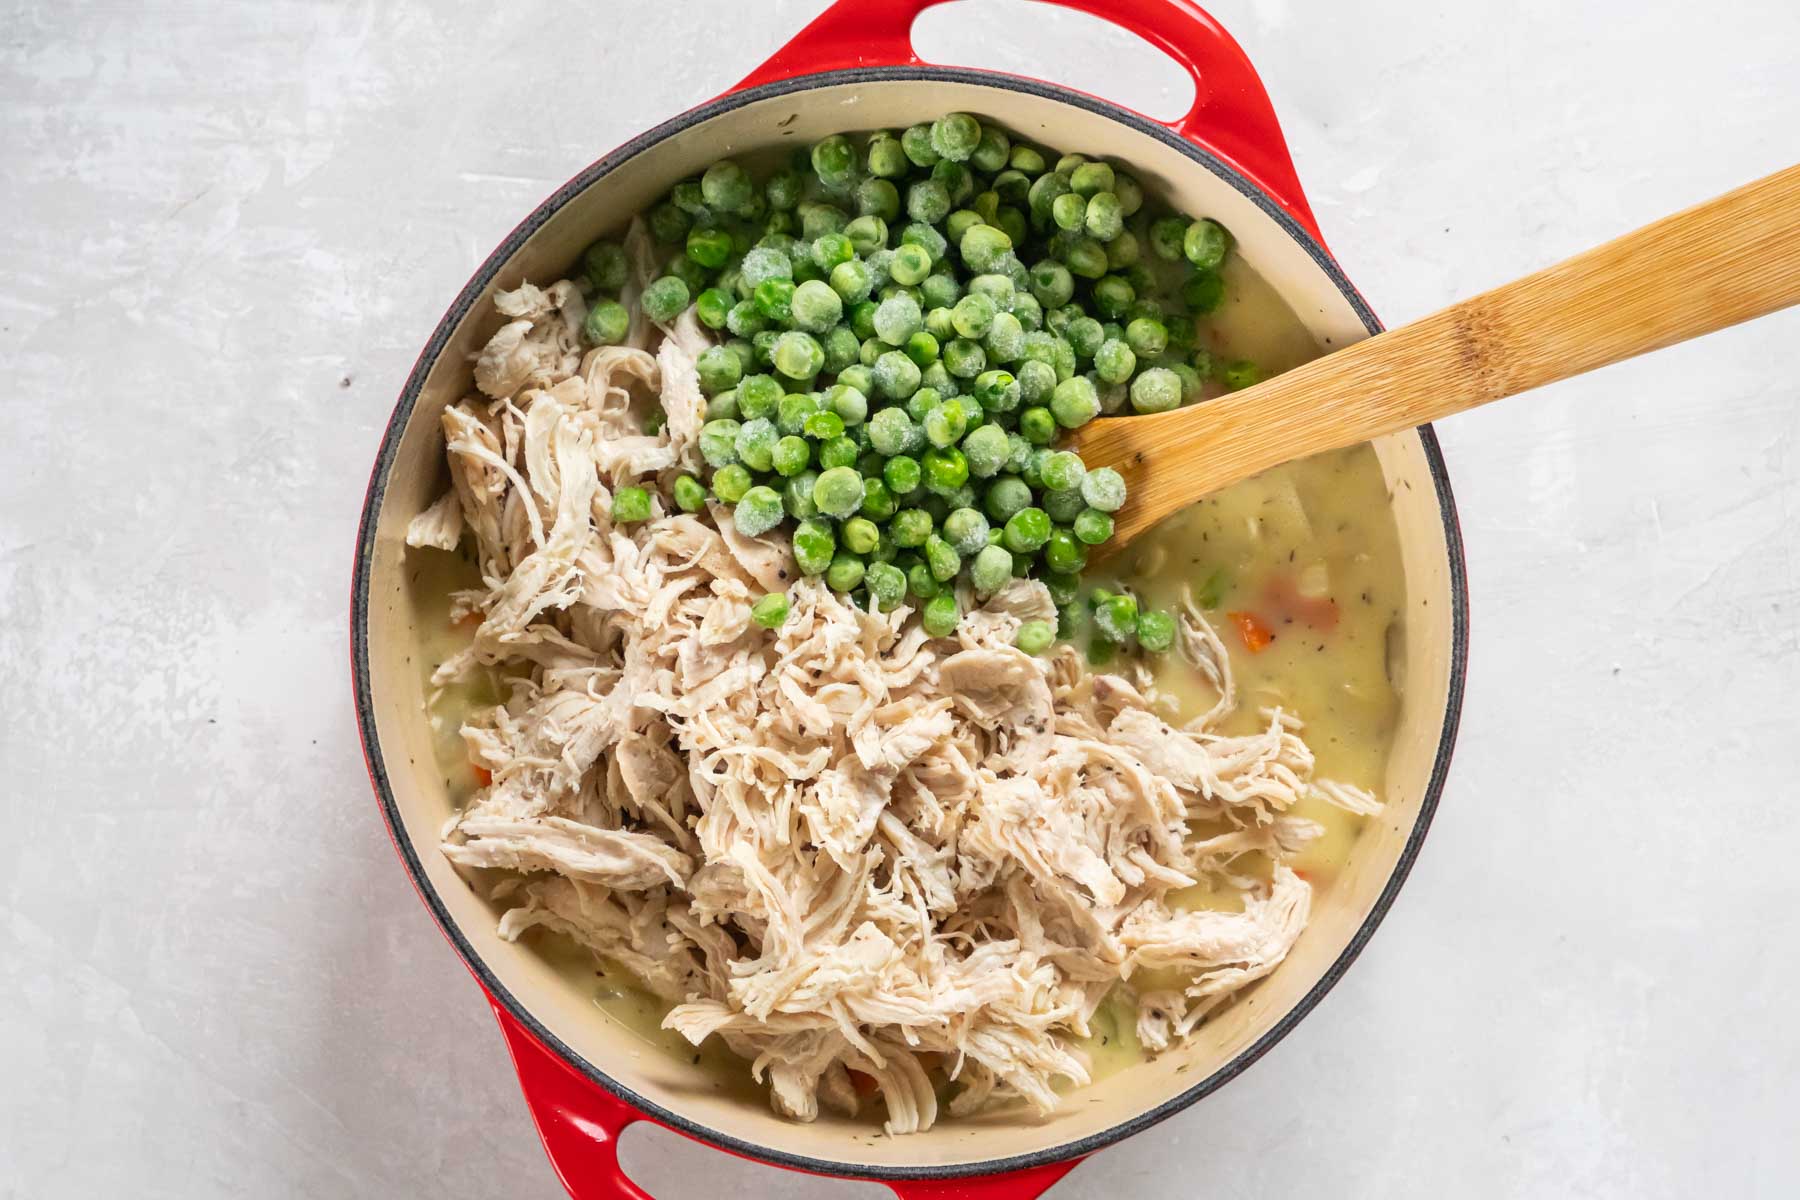 Shredded chicken and frozen peas added to filling in pot.